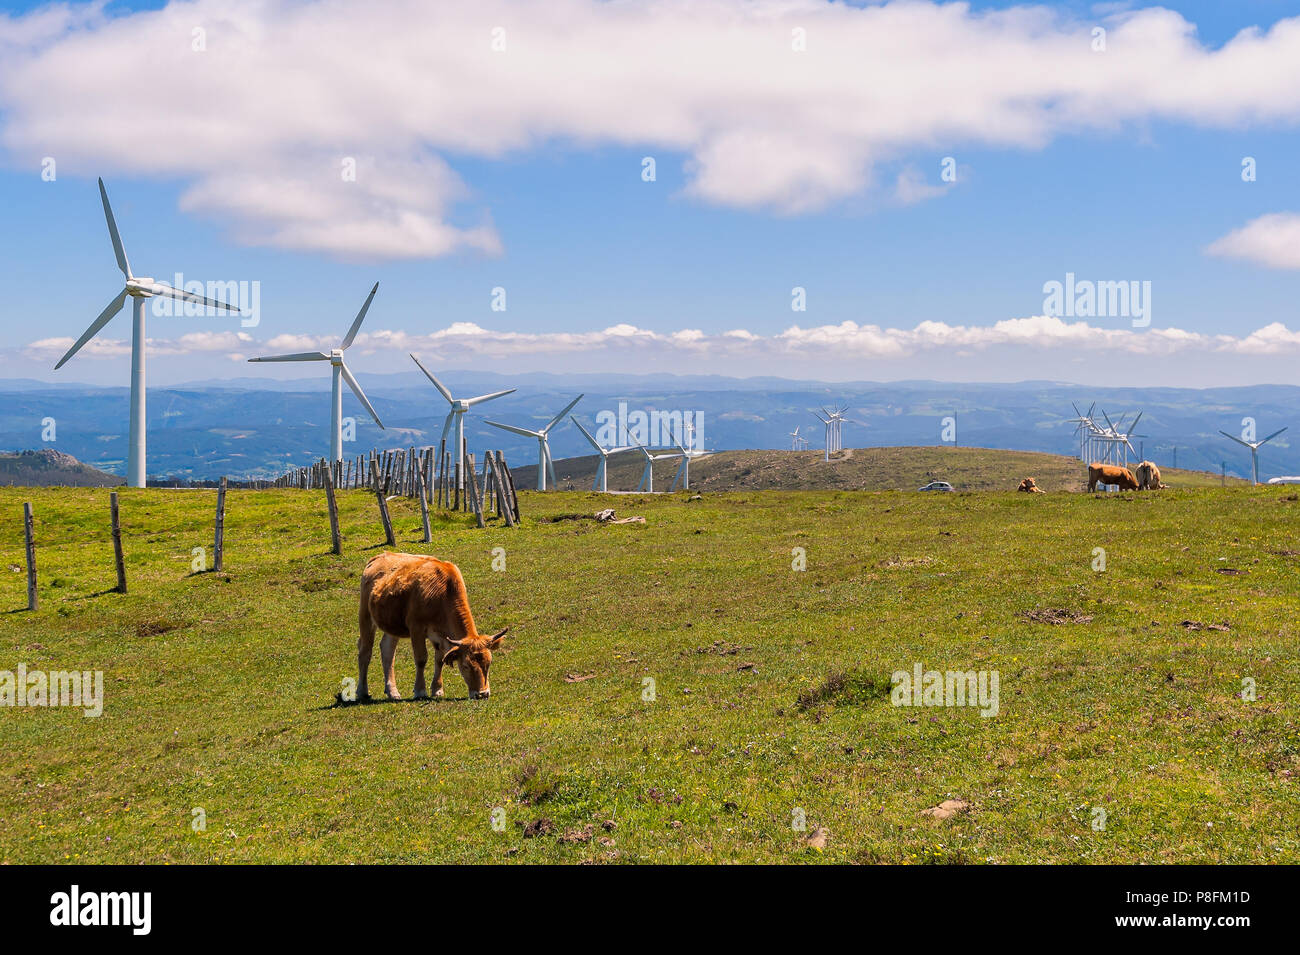 Cow eating grass in the meadow. On background the wind turbines for production of electricity. Stock Photo